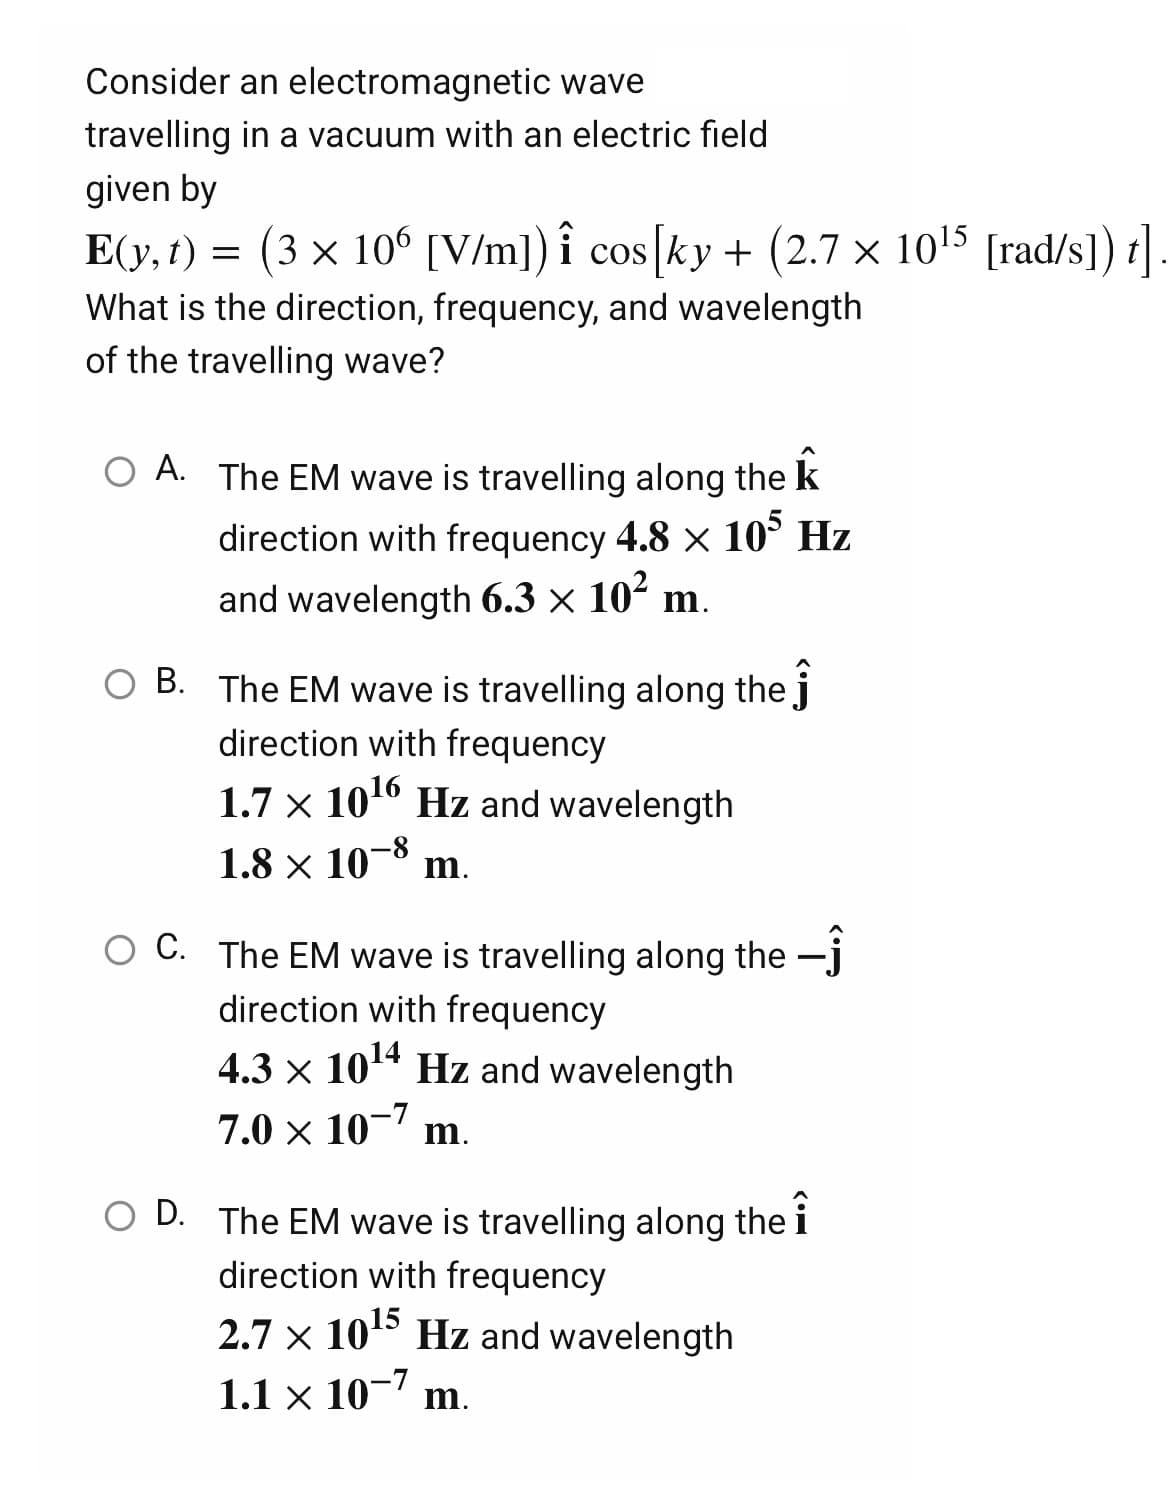 Consider
an electromagnetic wave
travelling
in a vacuum with an electric field
given by
E(y, t) = (3 × 106 [V/m]) i cos [ky + (2.7 x 10¹5 [rad/s]) t]
What is the direction, frequency, and wavelength
of the travelling wave?
O A. The EM wave is travelling along the k
direction with frequency 4.8 x 105 Hz
and wavelength 6.3 × 10² m.
B. The EM wave is travelling along the j
direction with frequency
1.7 x 10¹6 Hz and wavelength
1.8 × 10-8 m.
O C. The EM wave is travelling along the
direction with frequency
4.3 × 10¹4 Hz and wavelength
7.0 × 10-7 m.
O D. The EM wave is travelling along the i
direction with frequency
2.7 × 10¹5
10¹5 Hz and wavelength
1.1 x 10-7 m.
×